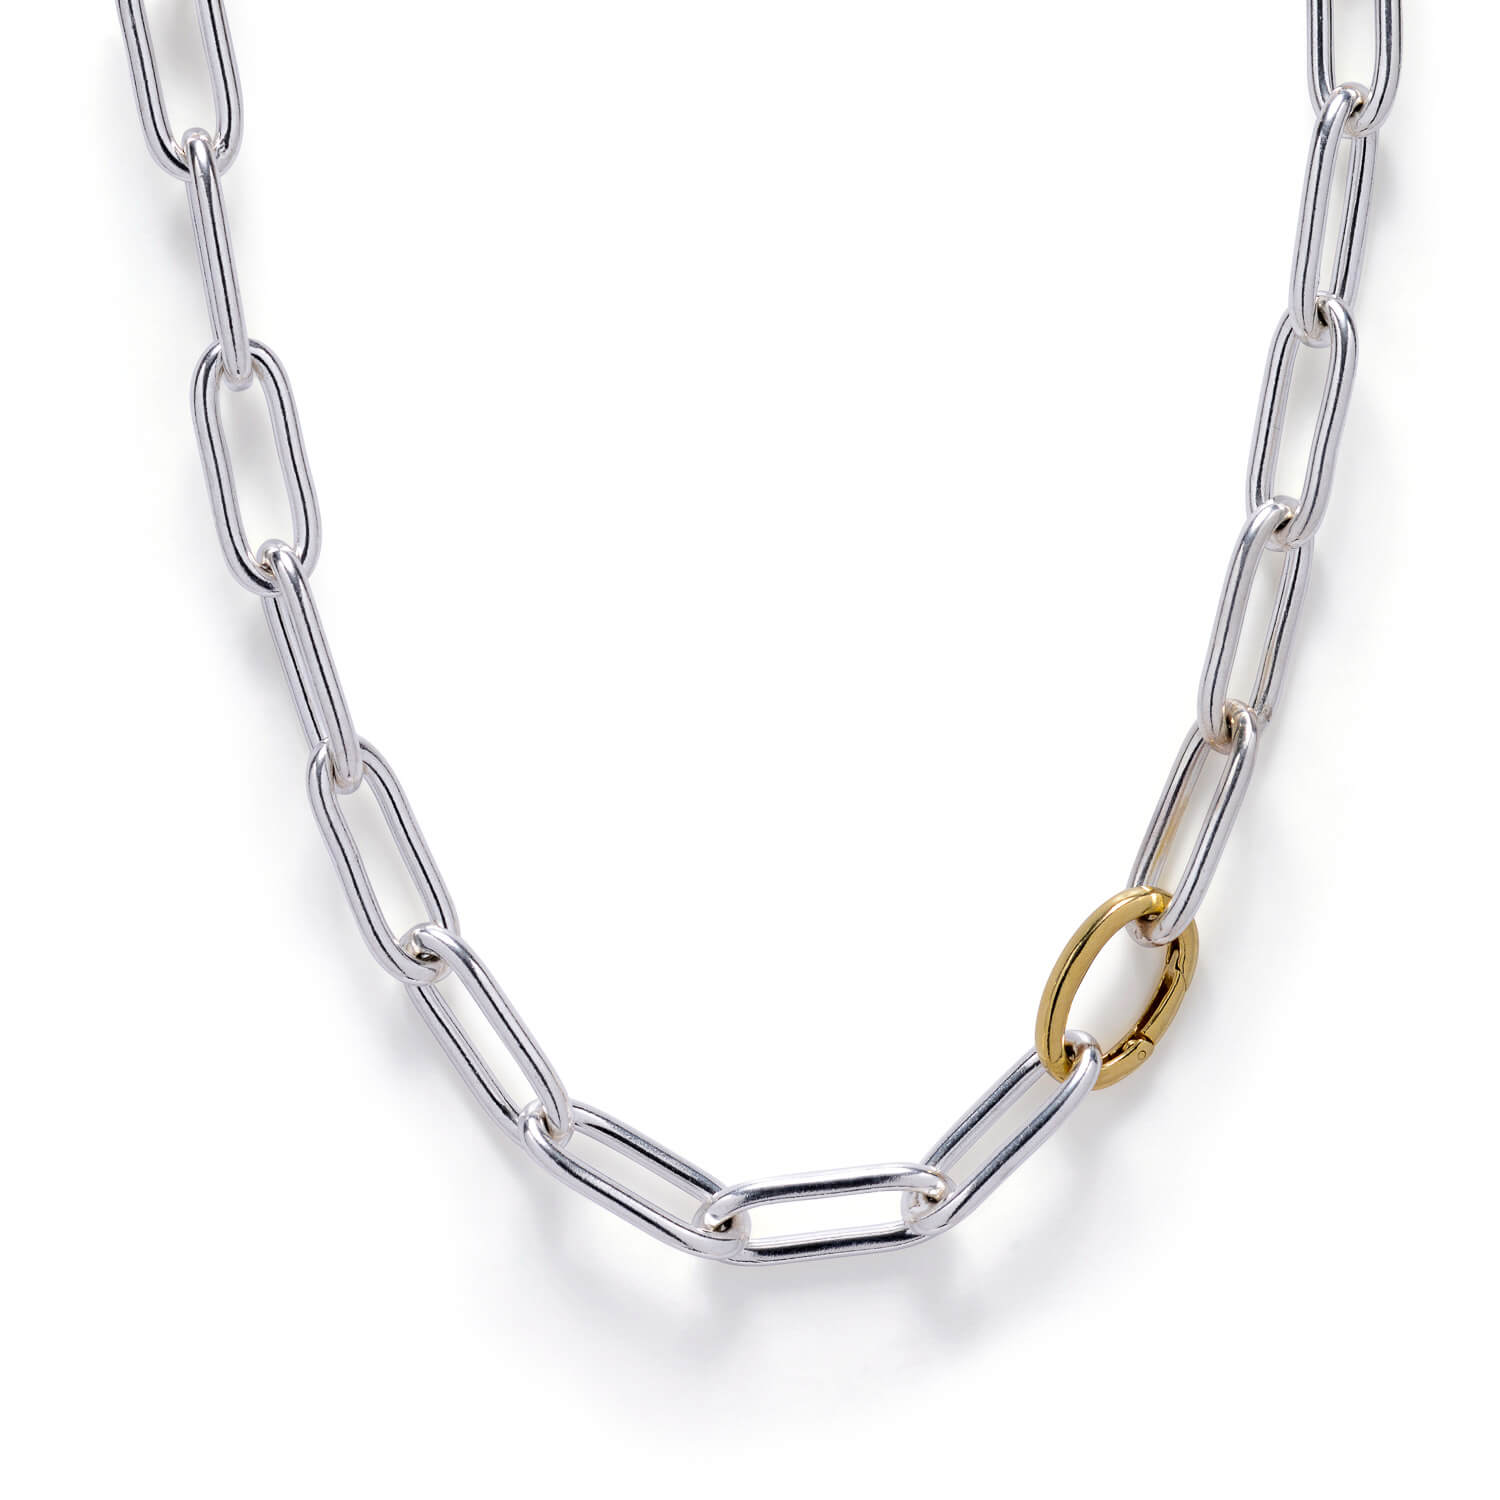 Silver Chunky Chain Necklace with Gold Bolt Ring